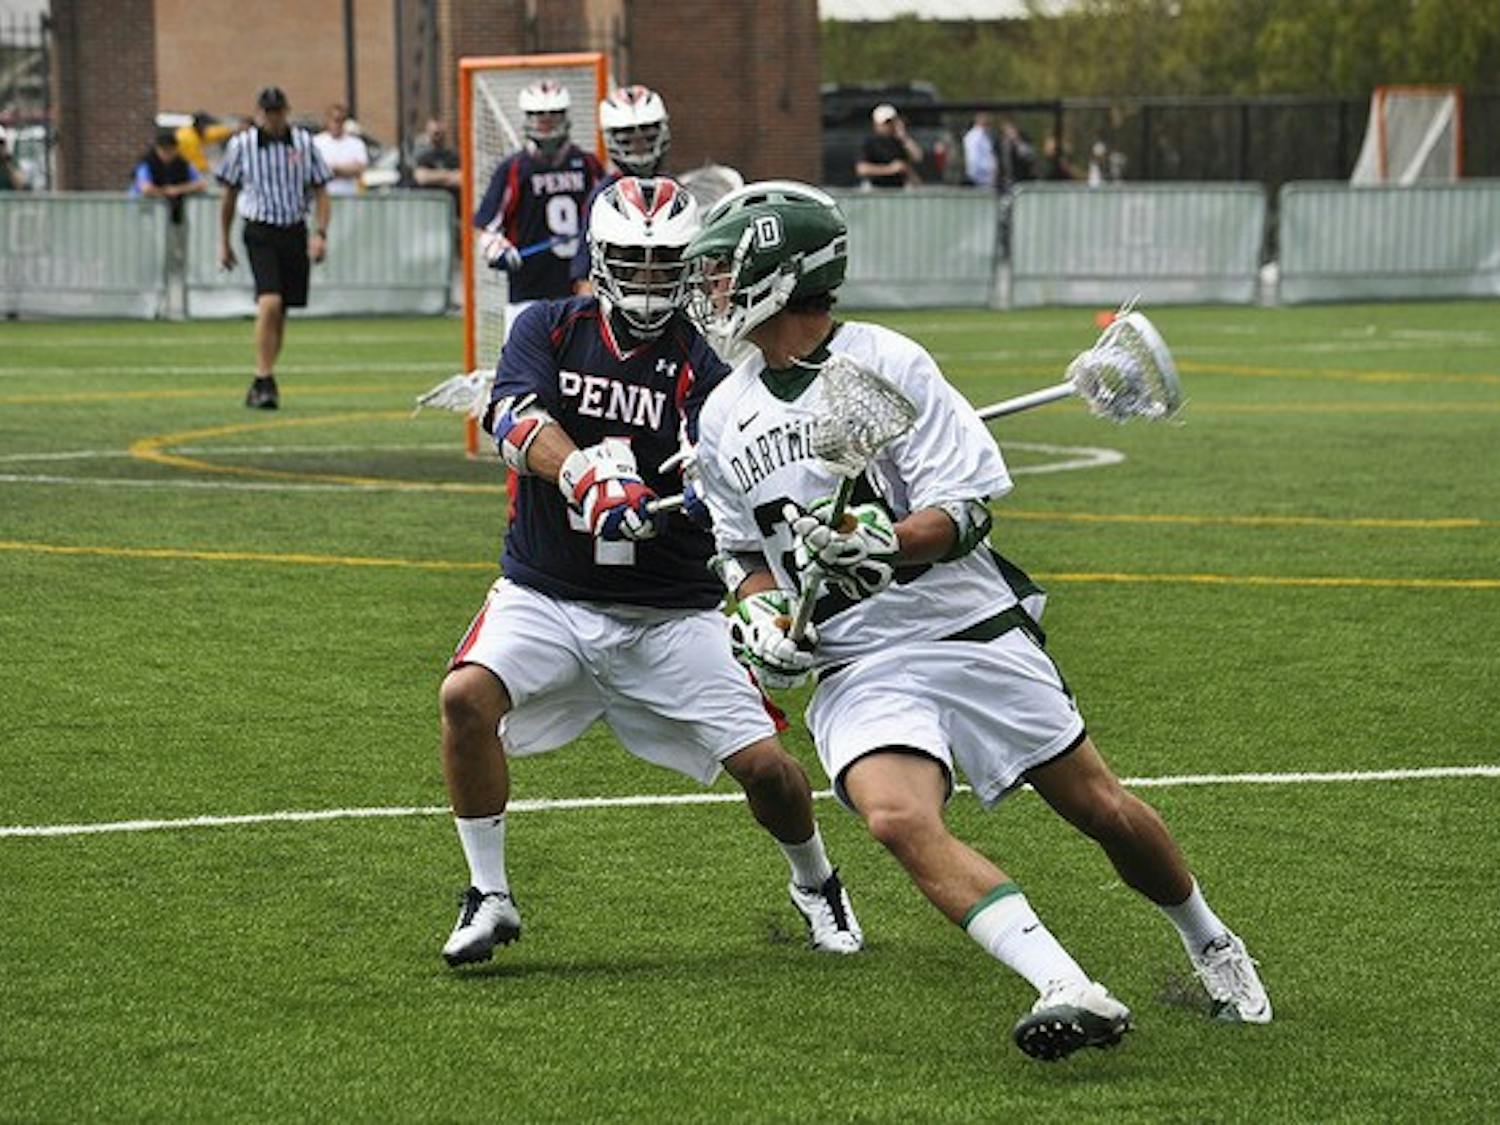 The men's lacrosse team finishes its season on Tuesday against the College of the Holy Cross at Scully-Fahey Field.